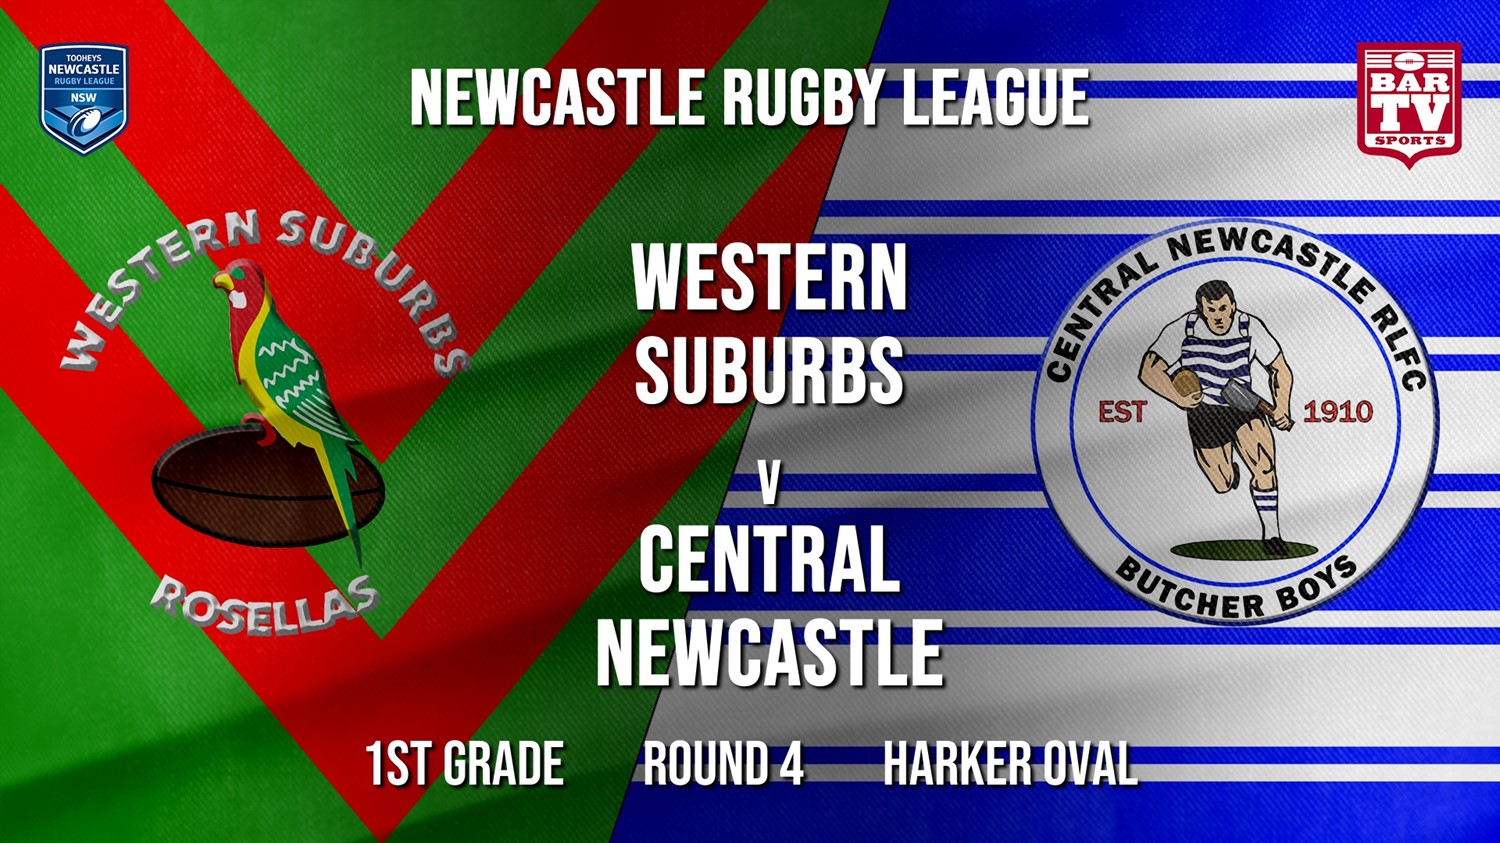 MINI GAME: Newcastle Rugby League Round 4 - 1st Grade - Western Suburbs Rosellas v Central Newcastle Slate Image